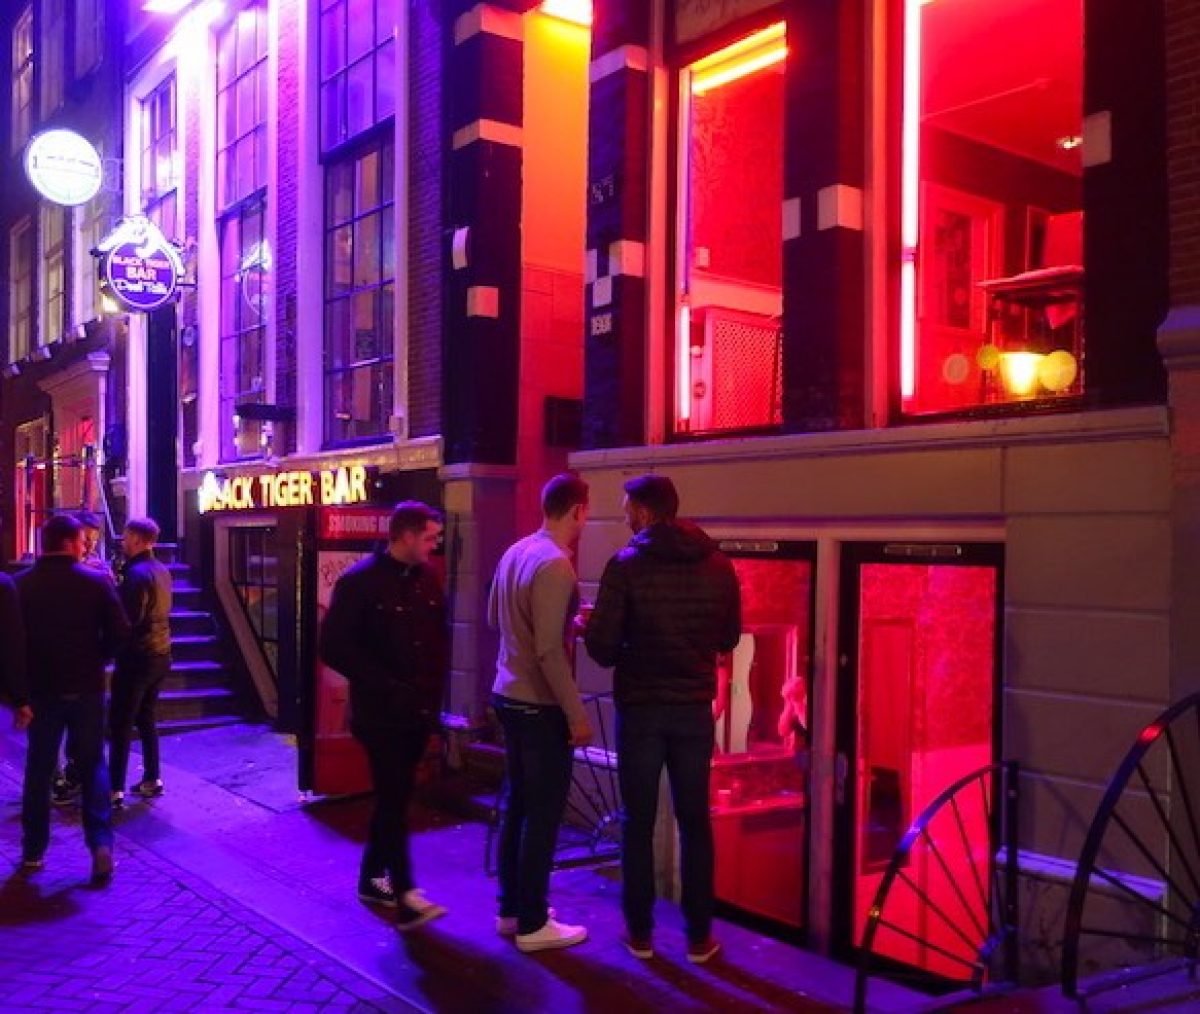 Naked Amsterdam - 10x Amsterdam Red Light District Prices - What does everything cost? Amsterdam Red Light District Tours